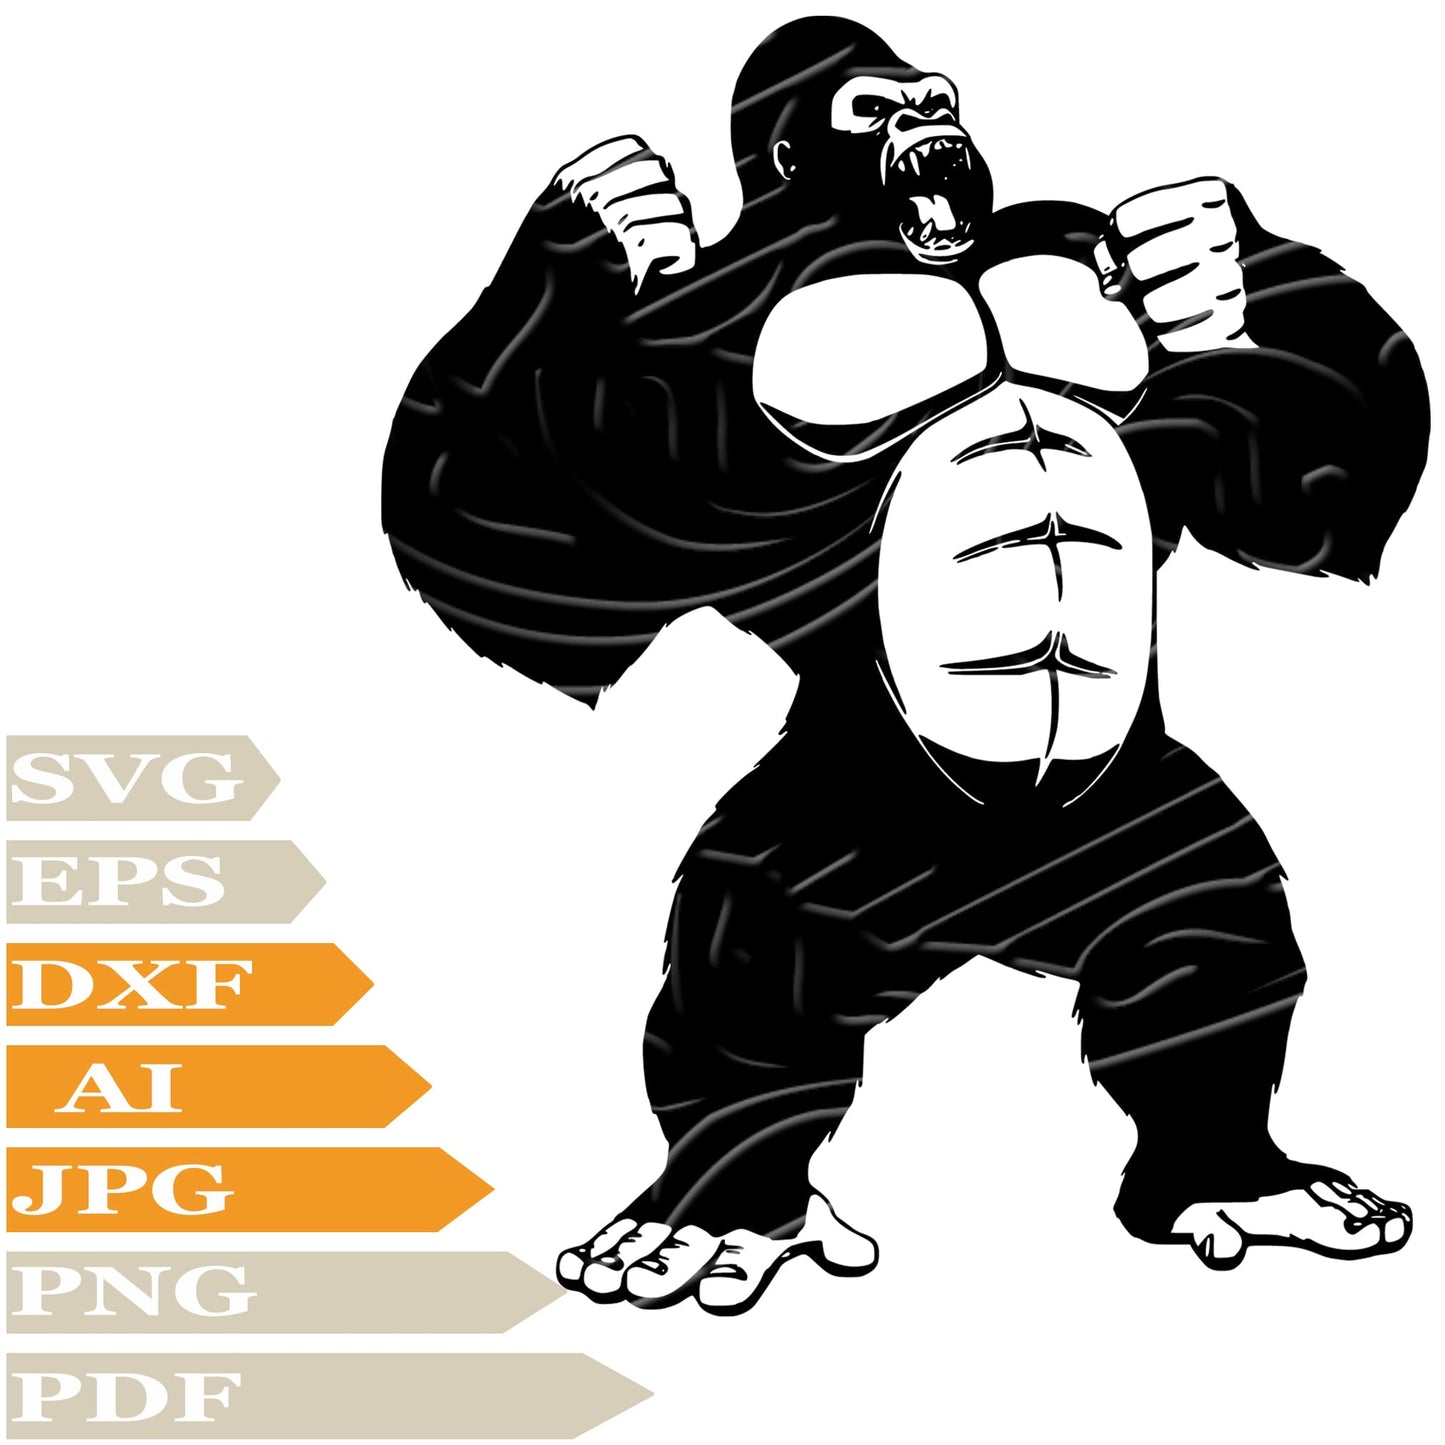 Monkey SVG-Angry Monkey Personalized SVG-Angry Gorilla Drawing SVG-Angry Monkey Vector Illustration-PNG-Decal-Cricut-Digital Files-Clip Art-Cut File-For Shirts-Silhouette